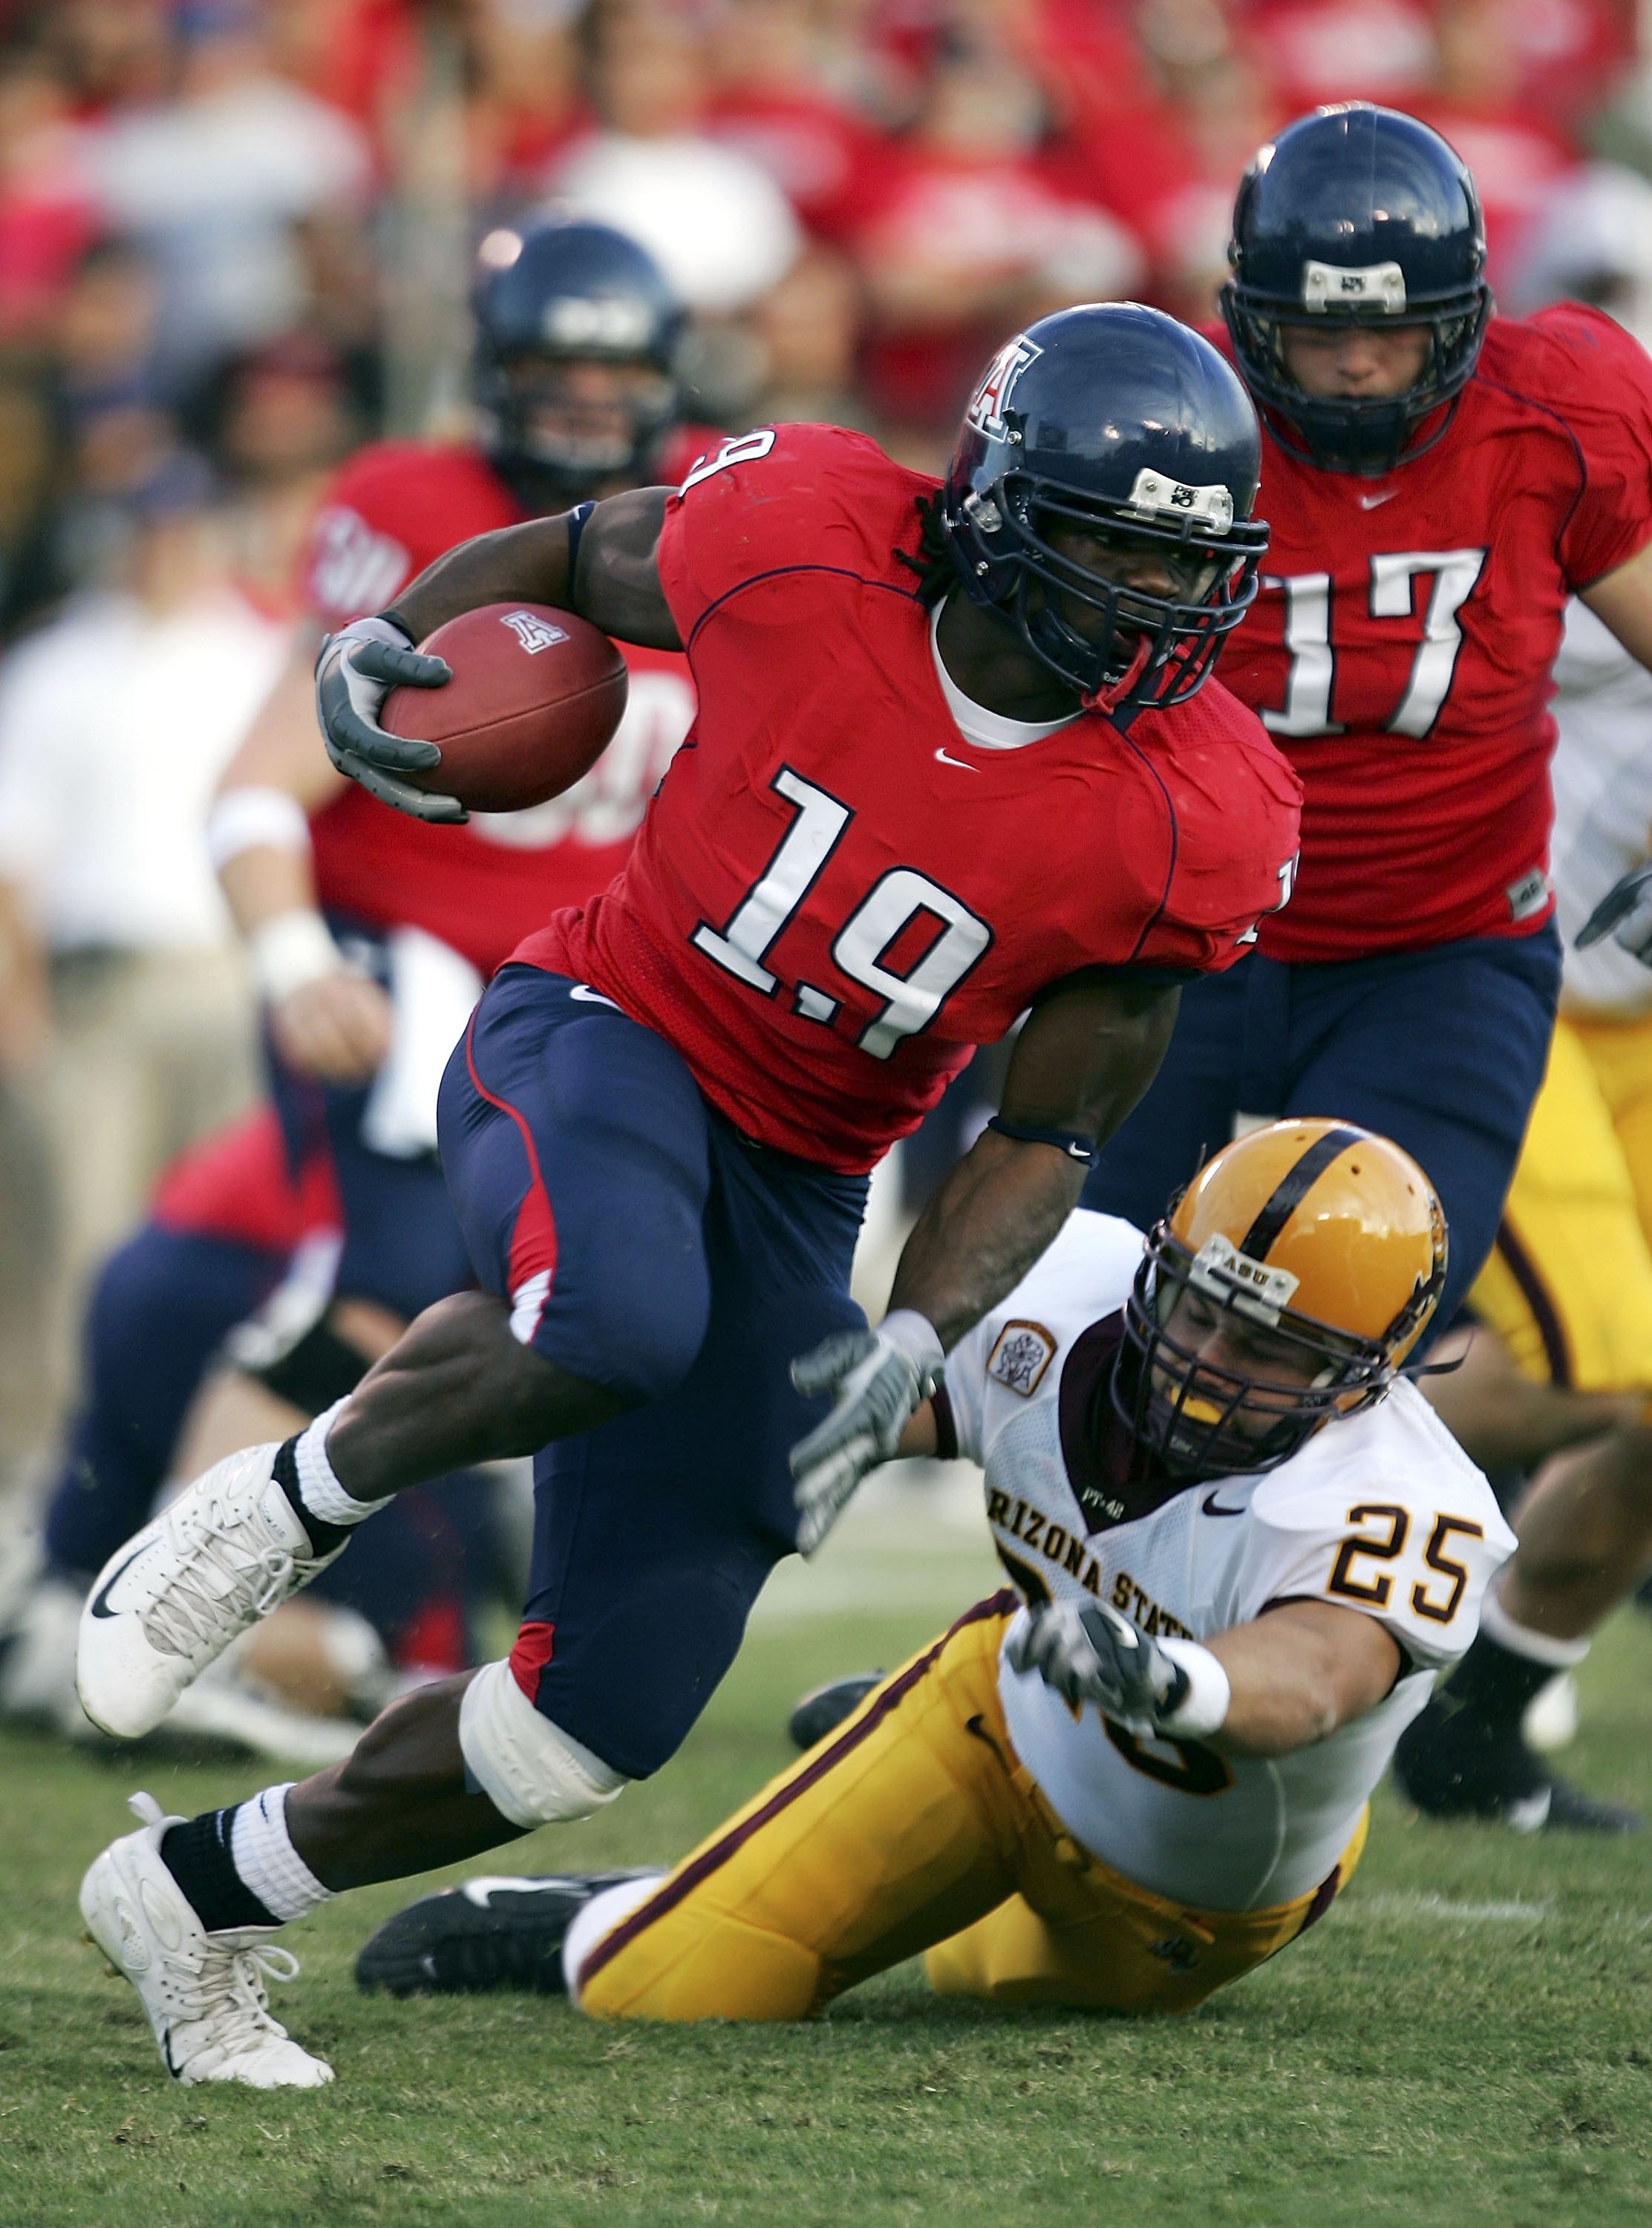 TUCSON, AZ - NOVEMBER 25:  Chris Henry #19 of the Arizona Wildcats runs with the ball as Mike Nixon #25 of the Arizona State Sun Devils tries to block him in the first half of the game at Arizona Stadium on November 25, 2006 in Tucson, Arizona.  (Photo by